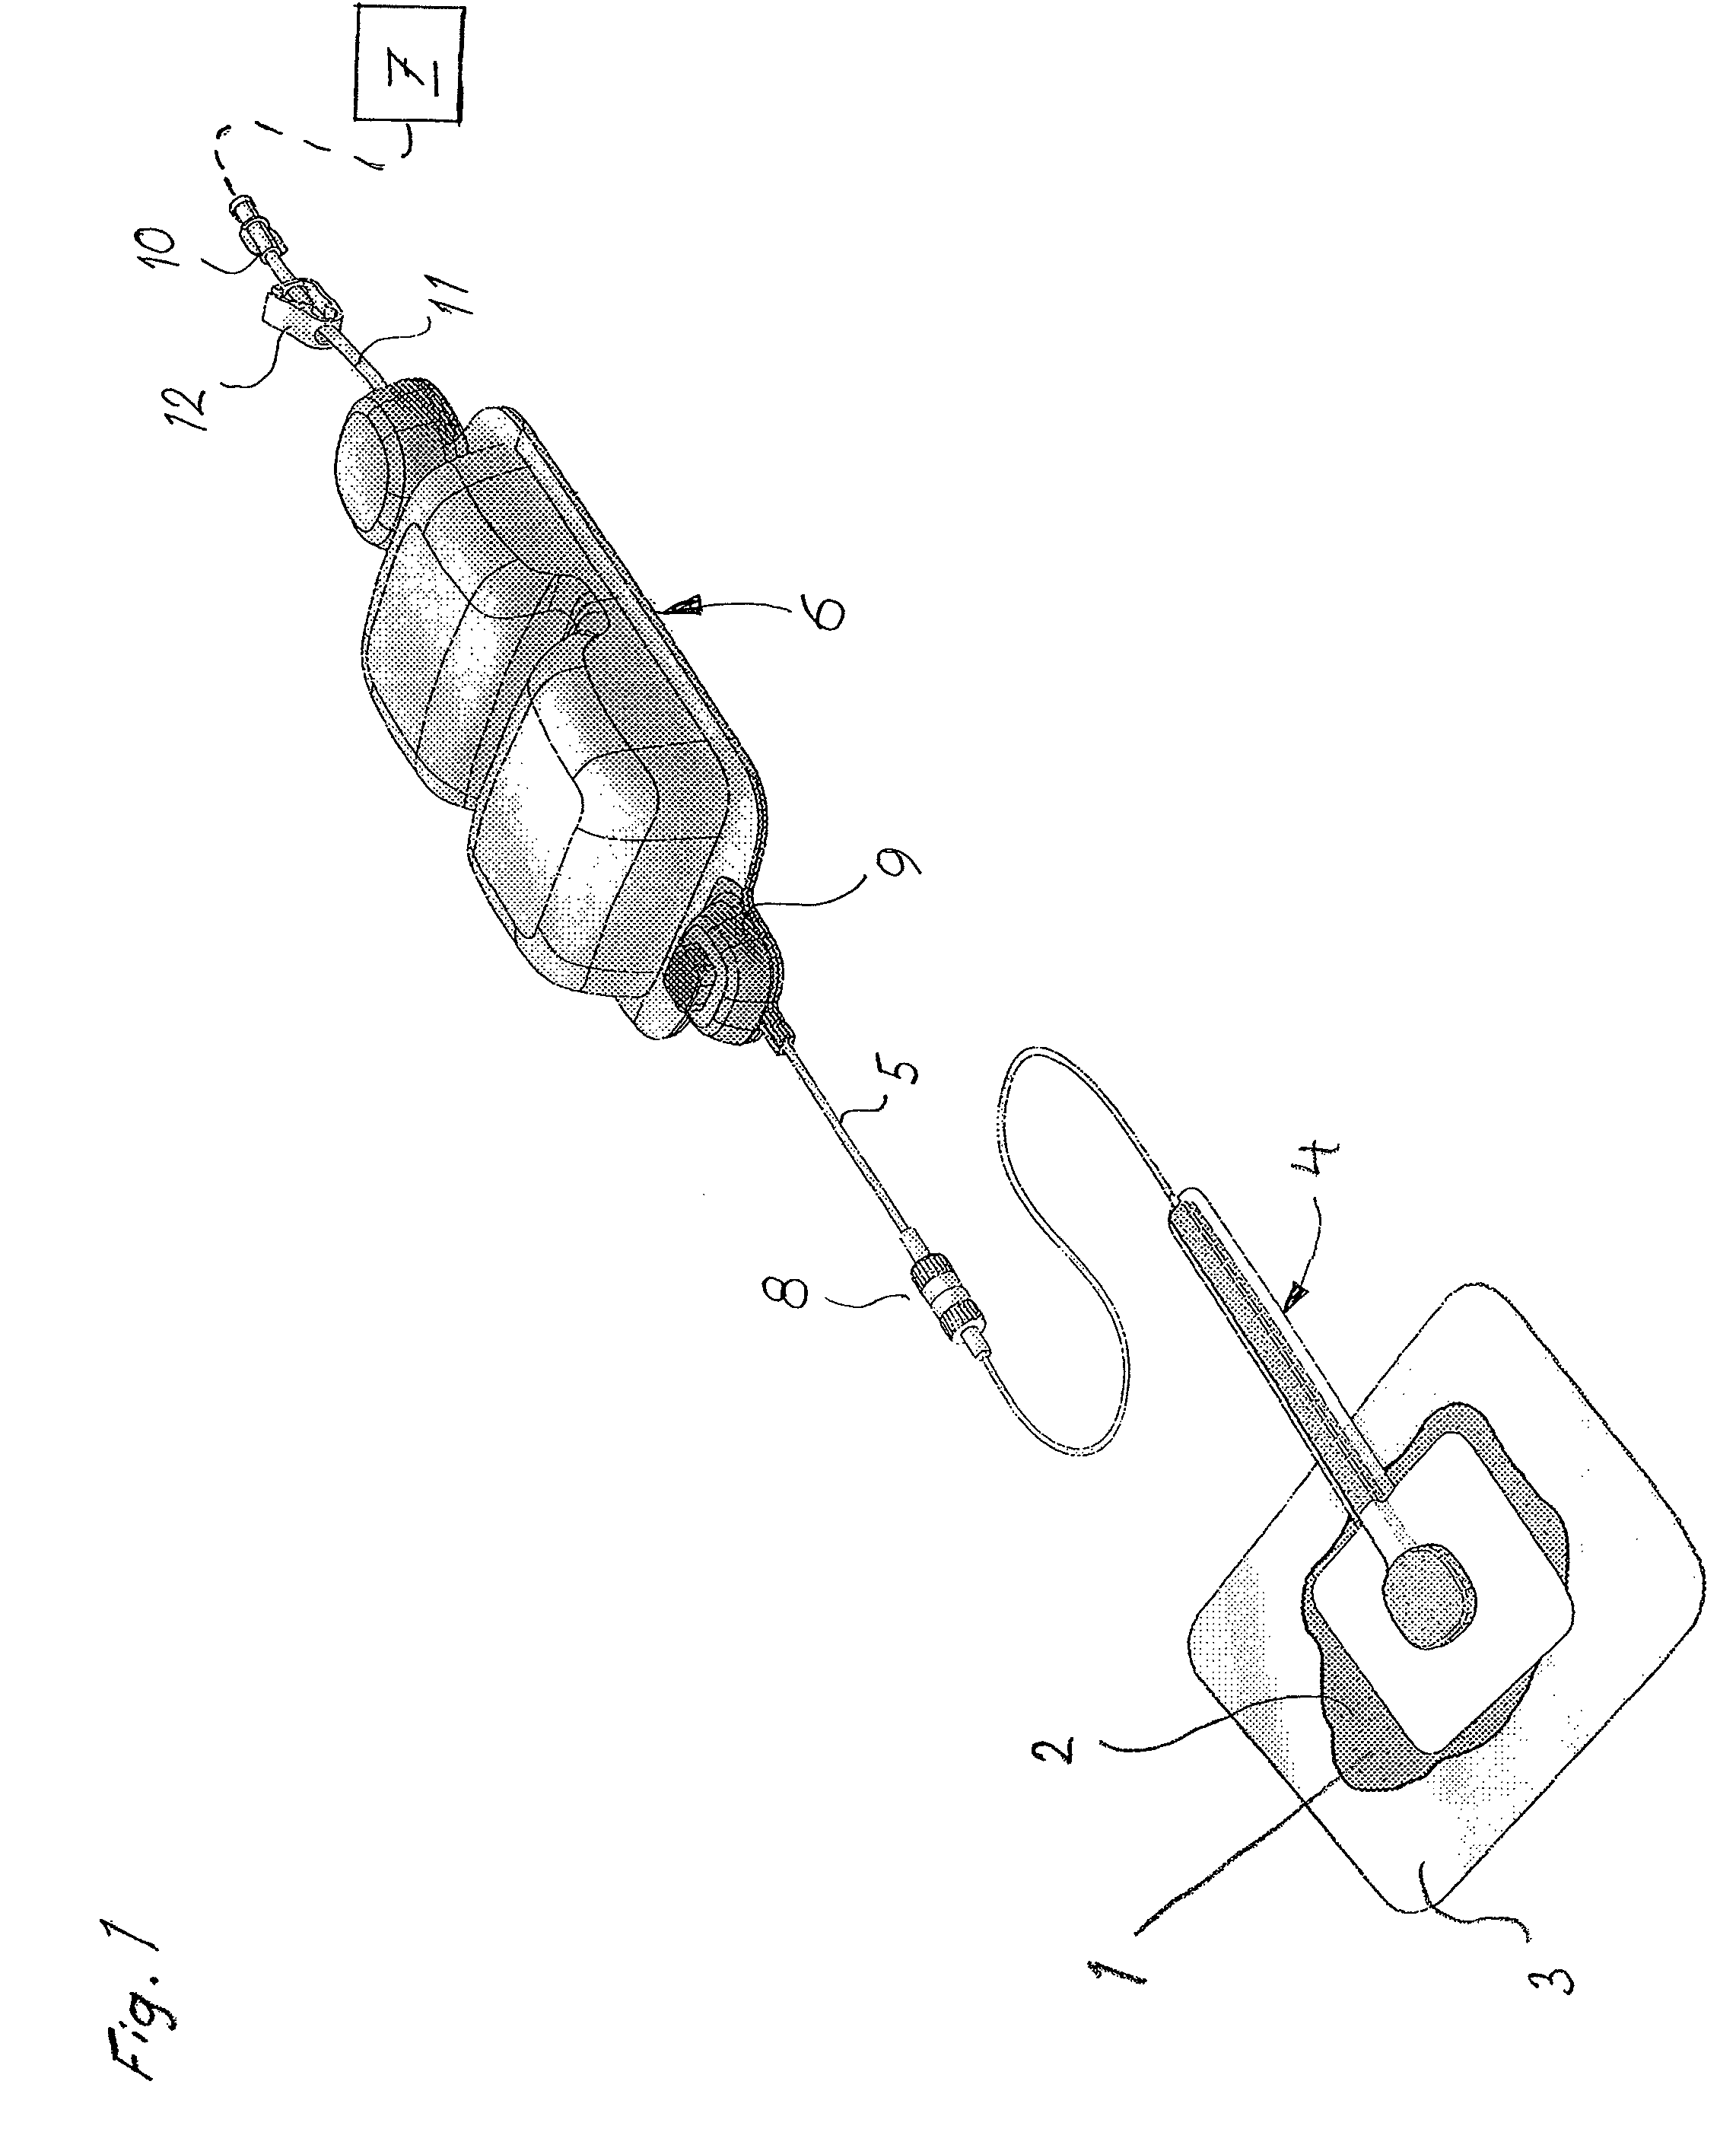 Device for treatment of wound using reduced pressure